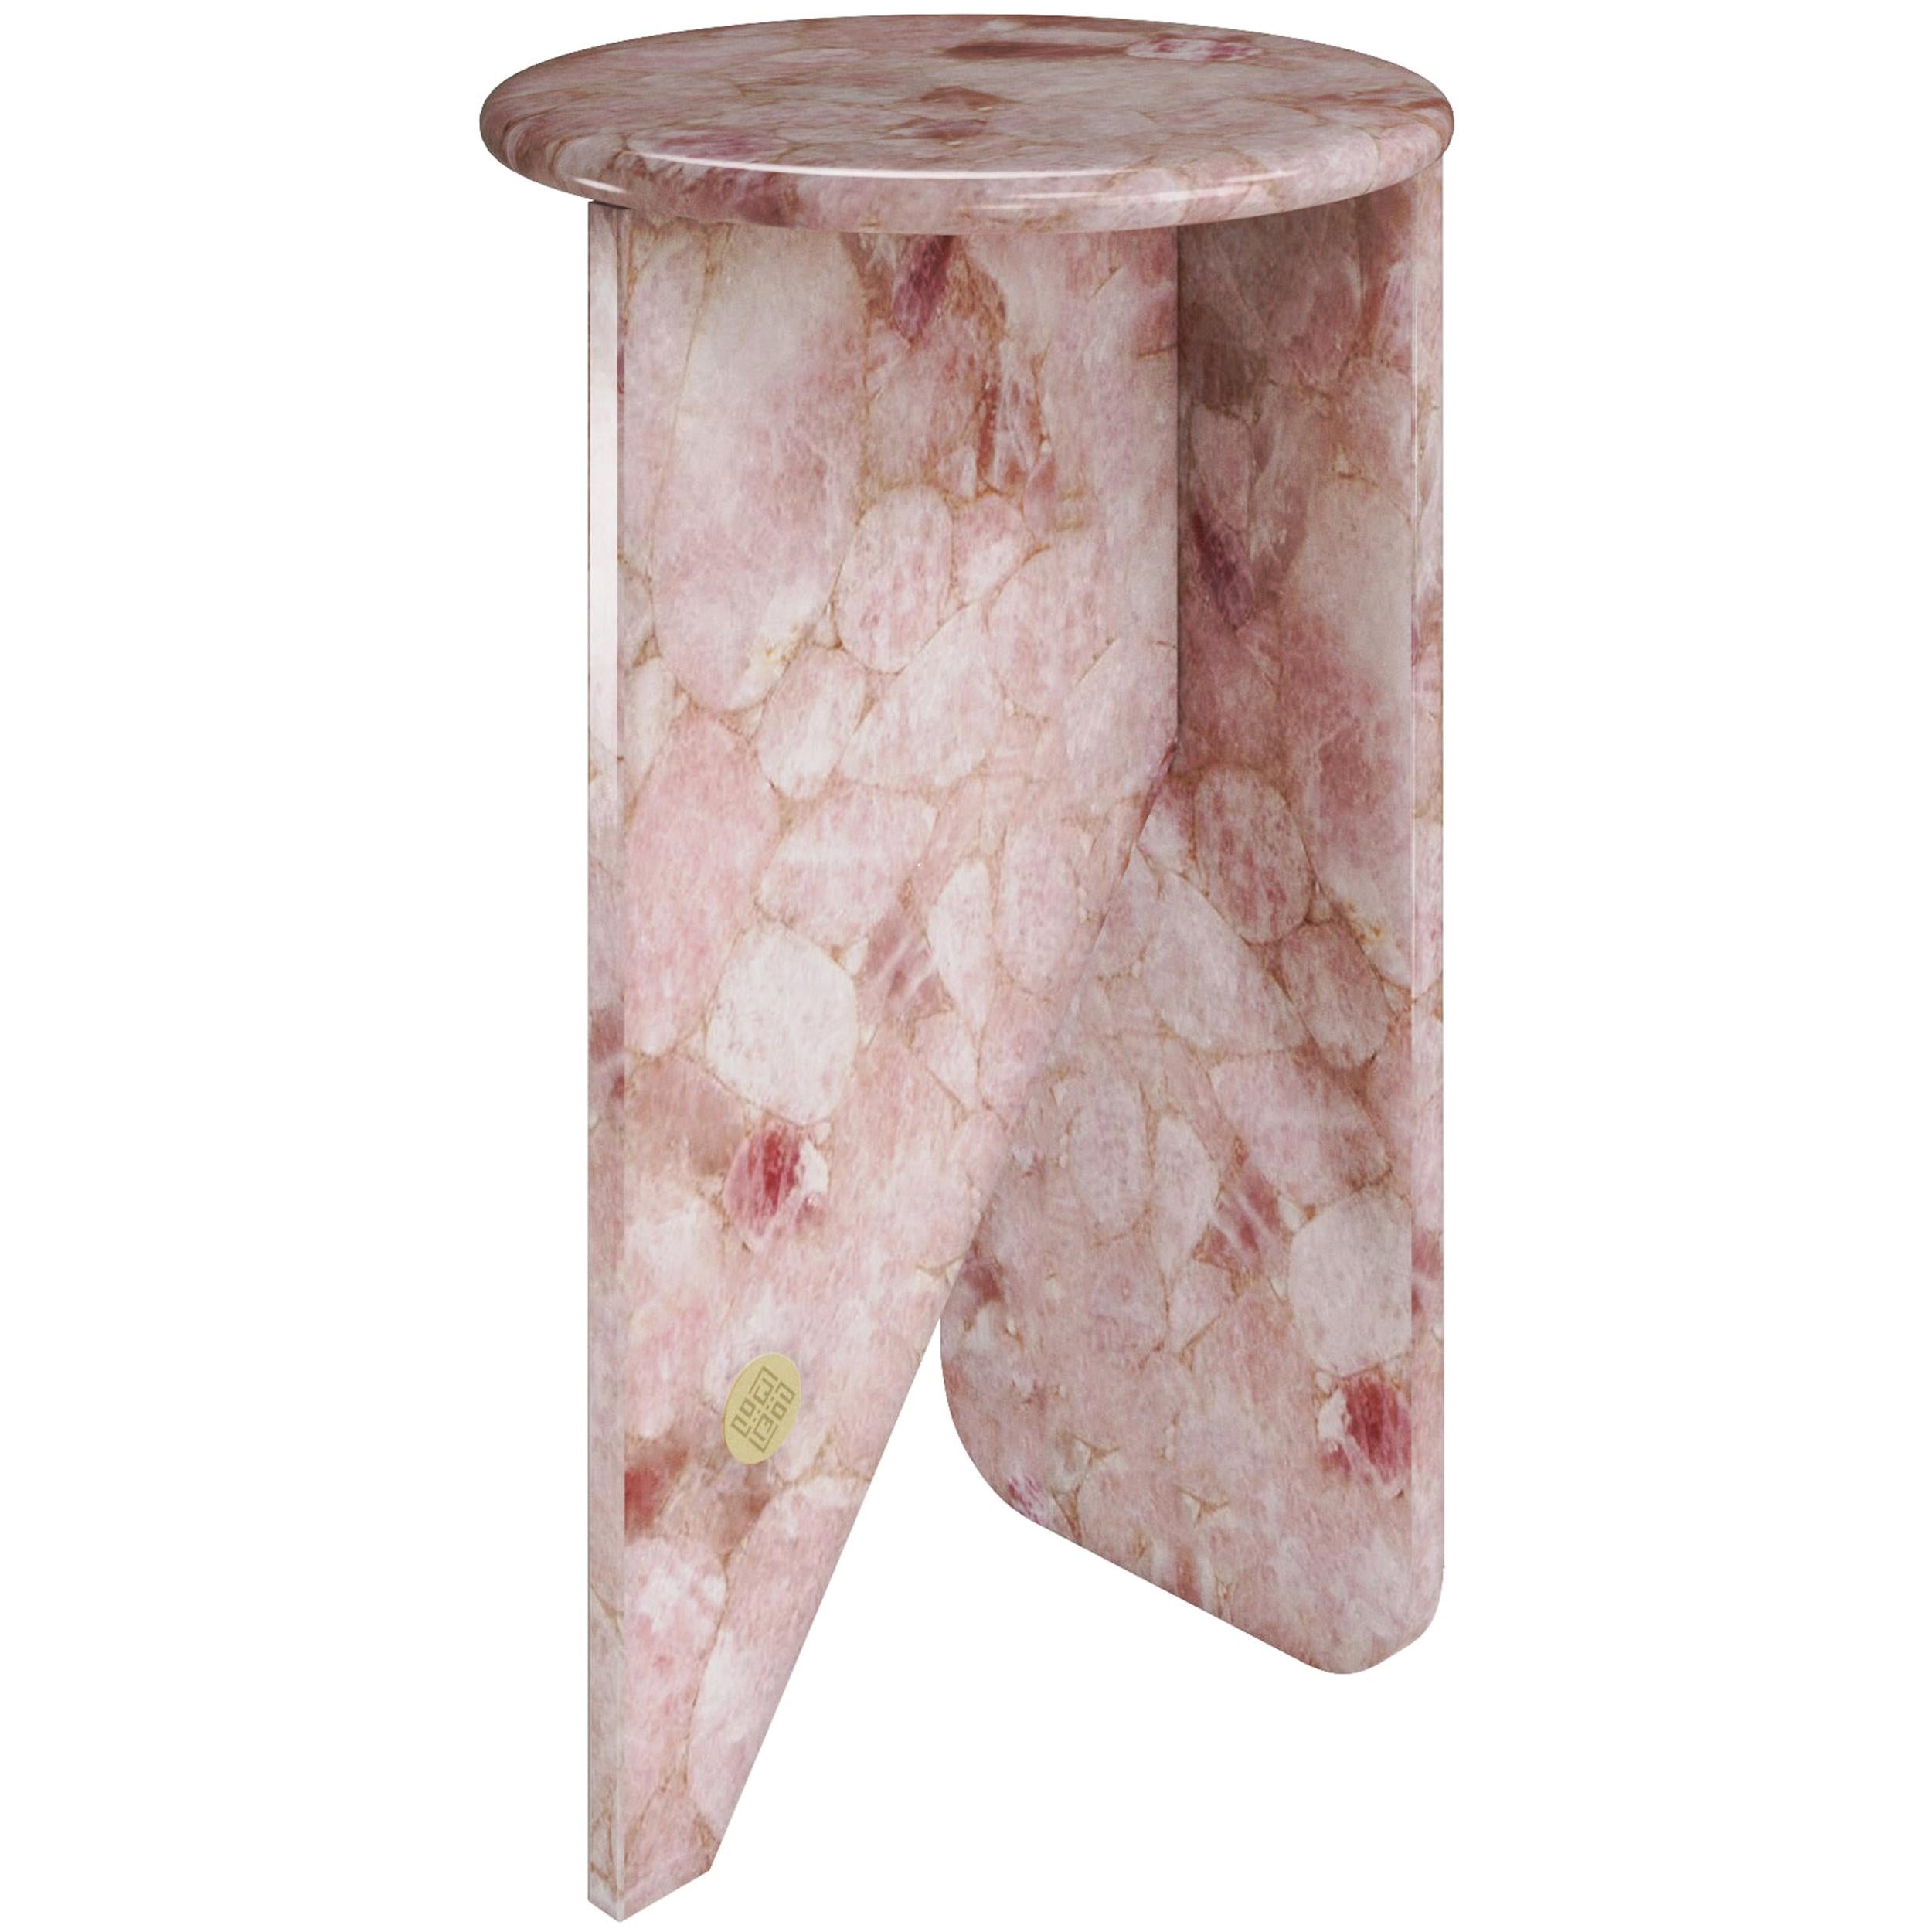 Quartz Liz Baby Love Side Table Hand Sculpted by Element & Co For Sale